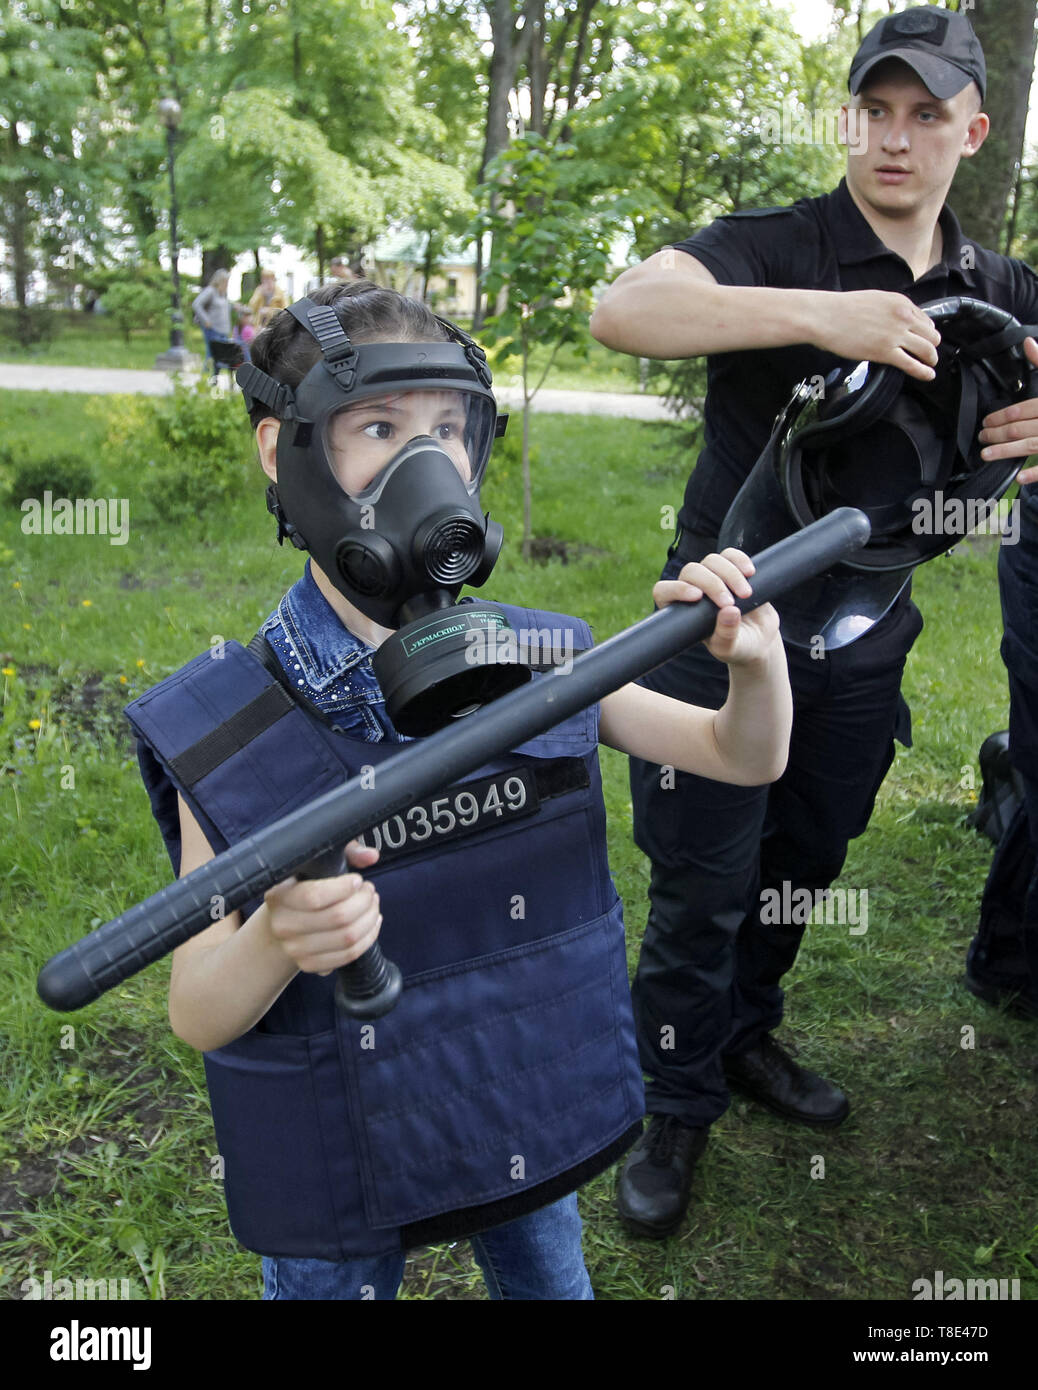 Kiev, Ukraine. 12th May, 2019. A little girl poses for a photo wearing riot police equipment during 'City of professions' children's festival, a children's career-oriented festival whose goal is to provide children to try themselves in different professions - rescuers, firemen, bomb experts, policemen, doctors, social workers, criminologists, aircraft designer, atomic engineer, a businessman, a scientist, and others. Credit: Serg Glovny/ZUMA Wire/Alamy Live News Stock Photo